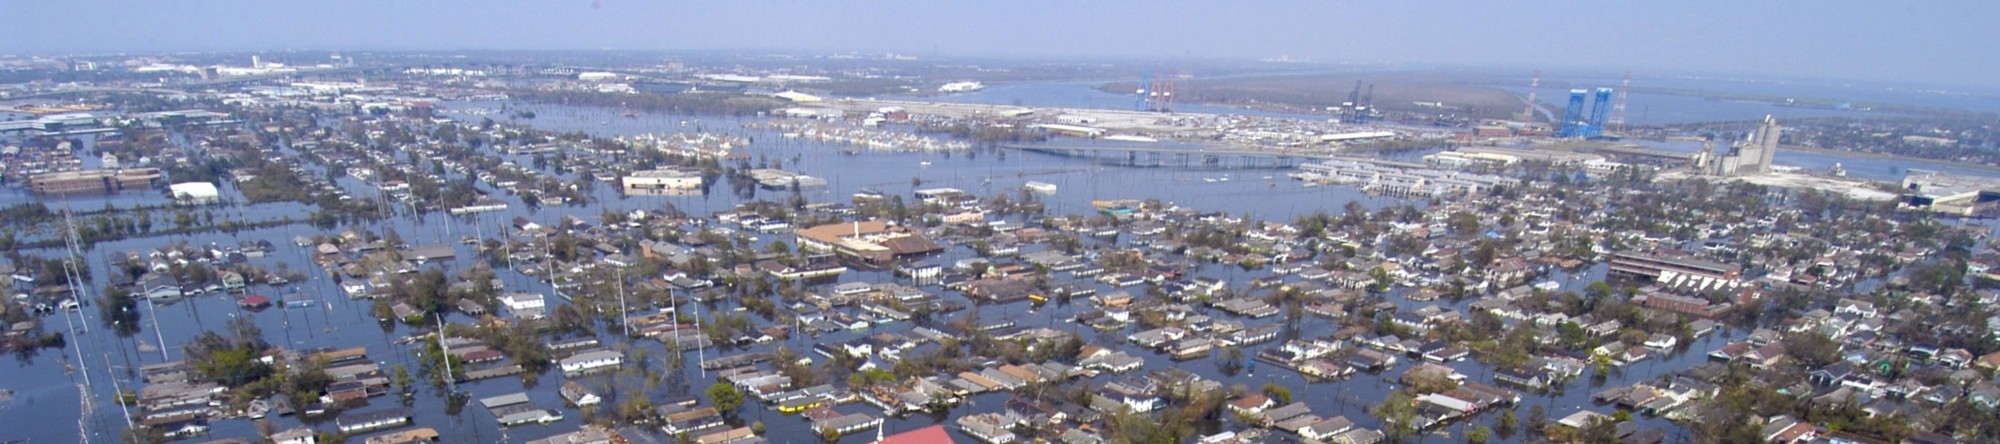 Hurricane Katrina linked to a rise in heart attacks years later